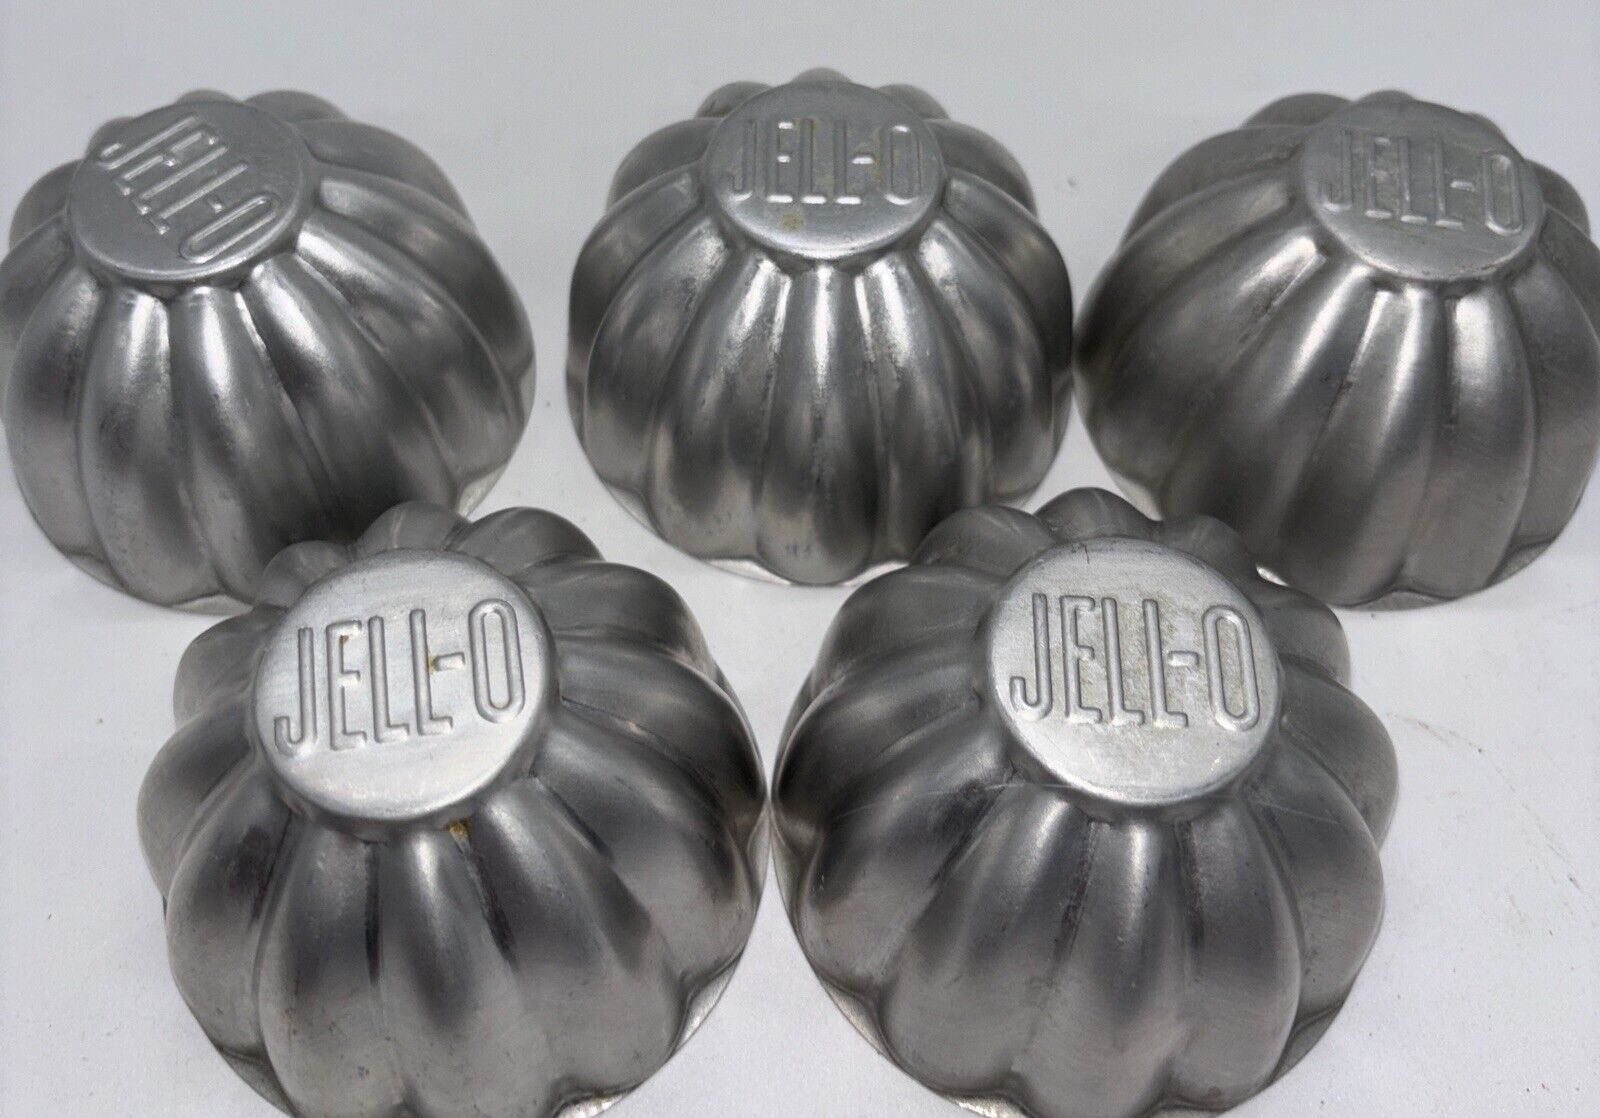 VTG Jell-O Jello Aluminum Molds Metal Scalloped Fluted Tins Cups - Set of 5